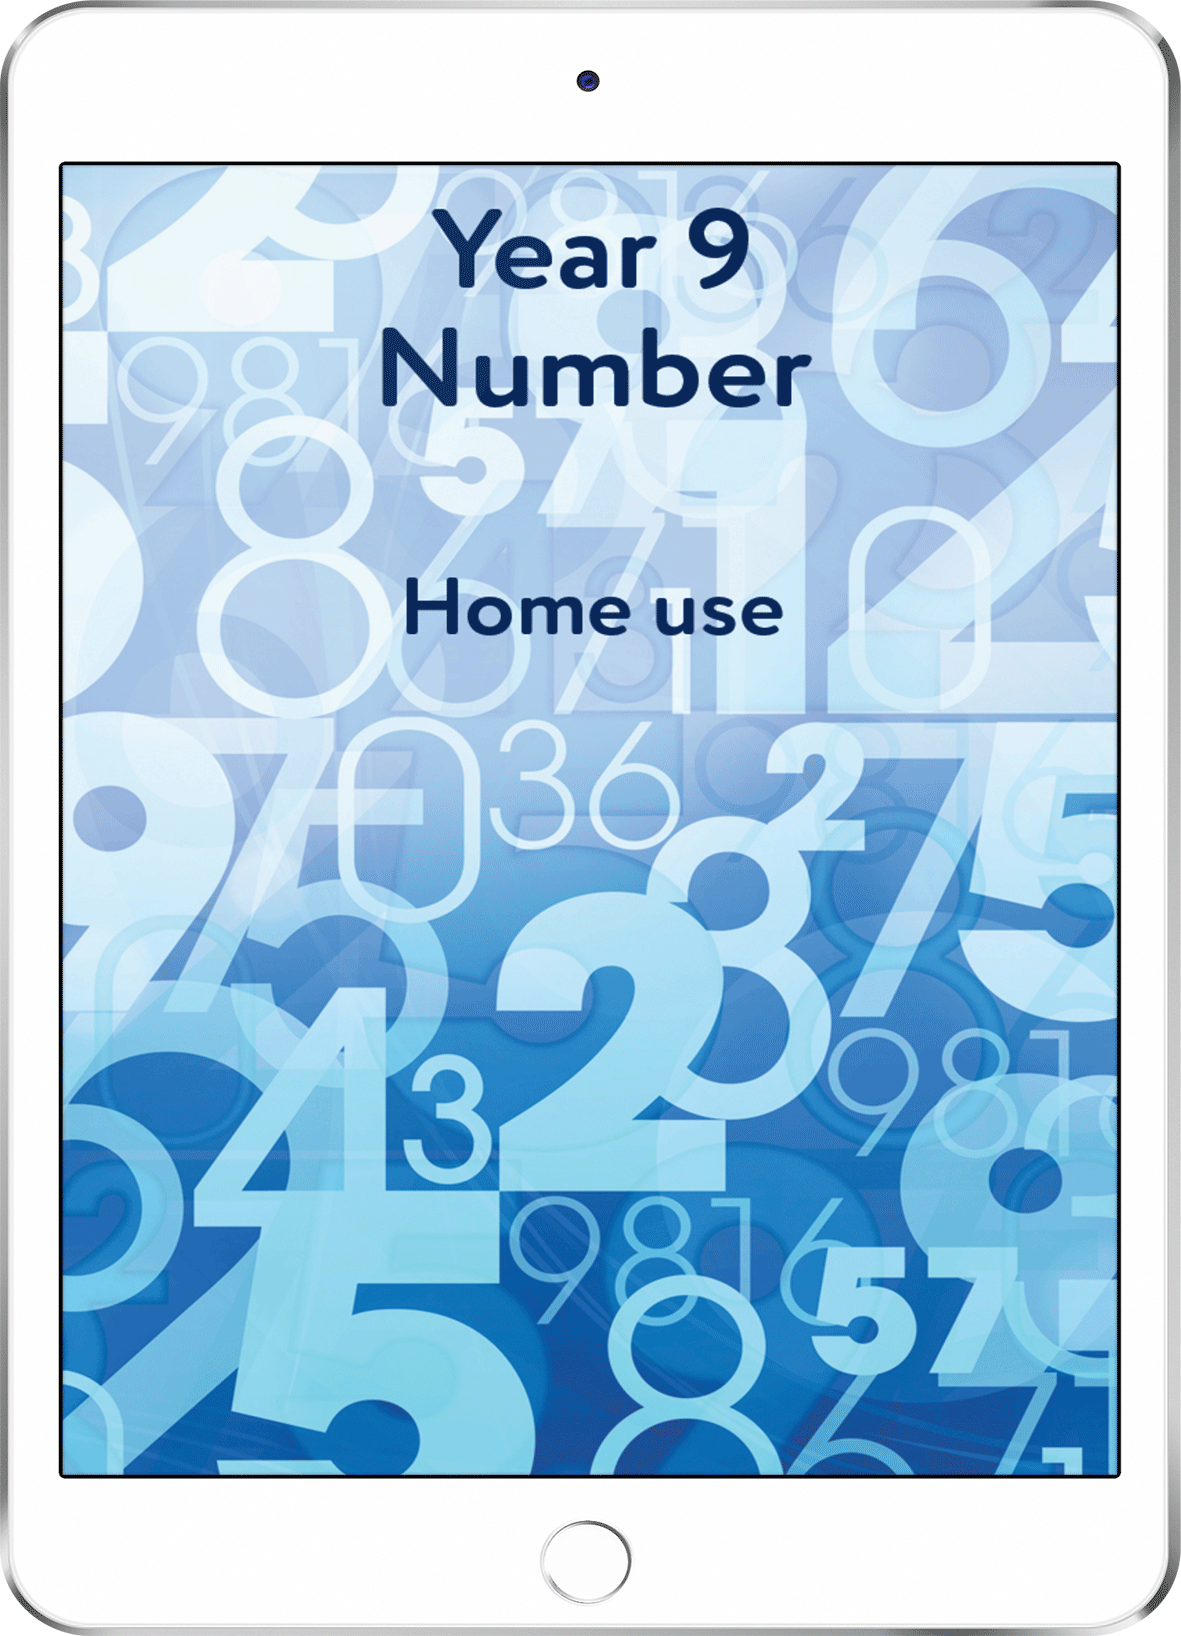 Year 9 Number - Home Use